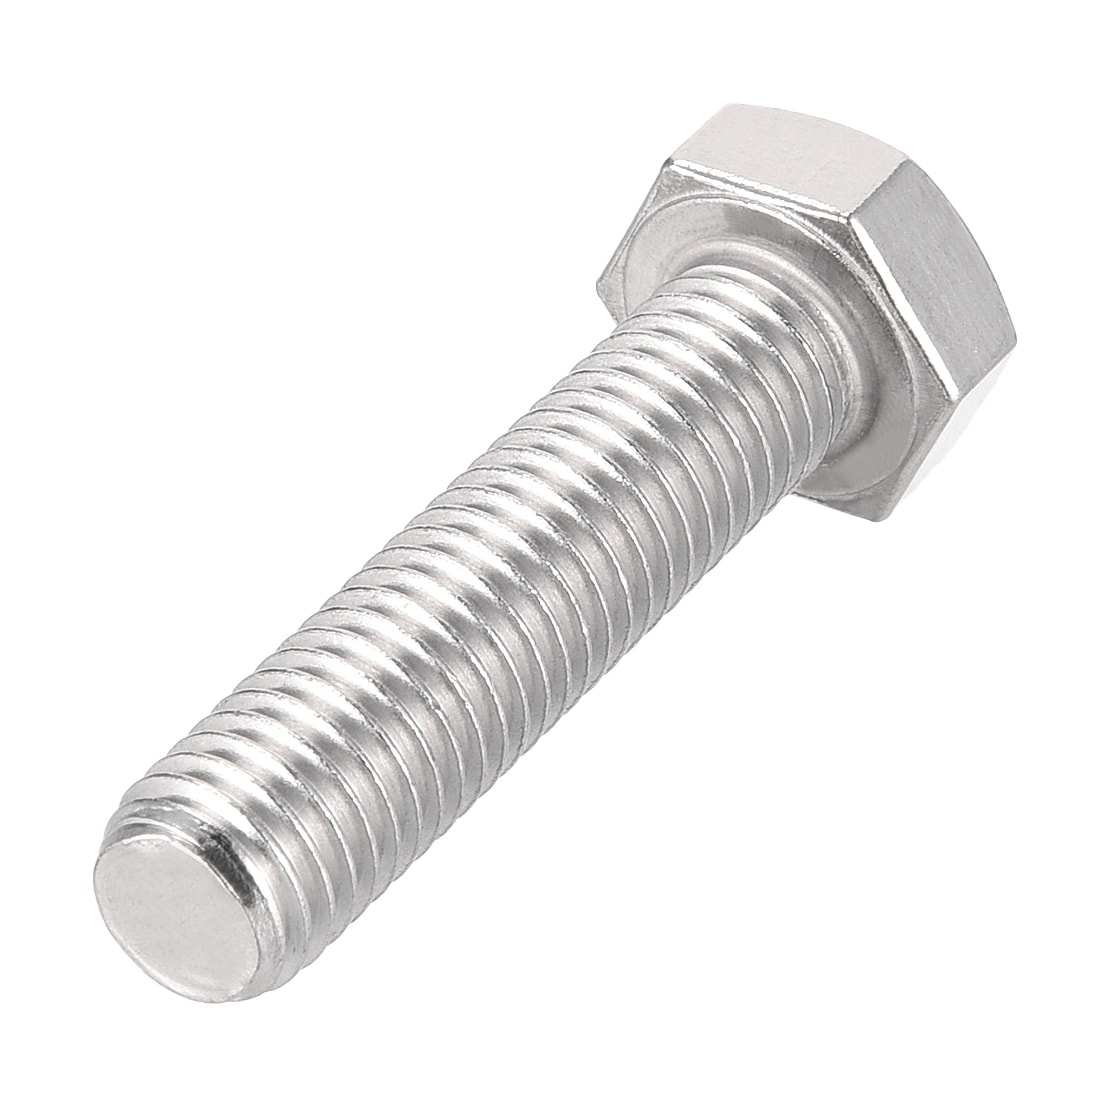 uxcell M10 Thread 40mm 304 Stainless Steel Hex Head Left Hand Screw Bolts Fastener